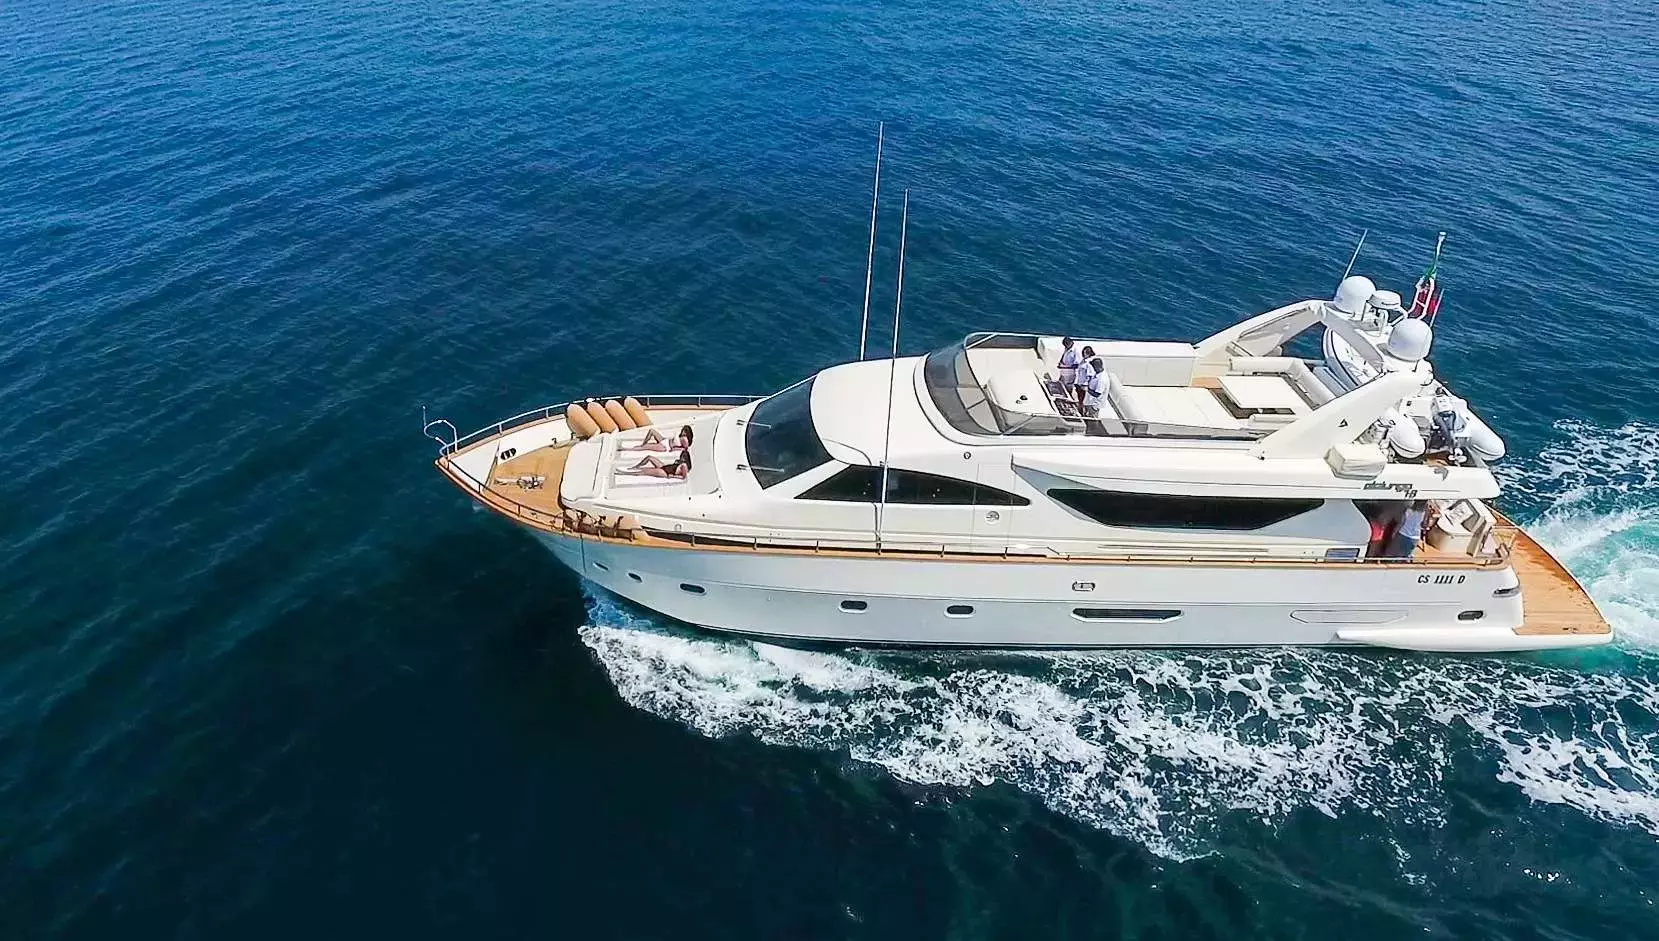 Riviera by Alalunga - Top rates for a Charter of a private Motor Yacht in Italy